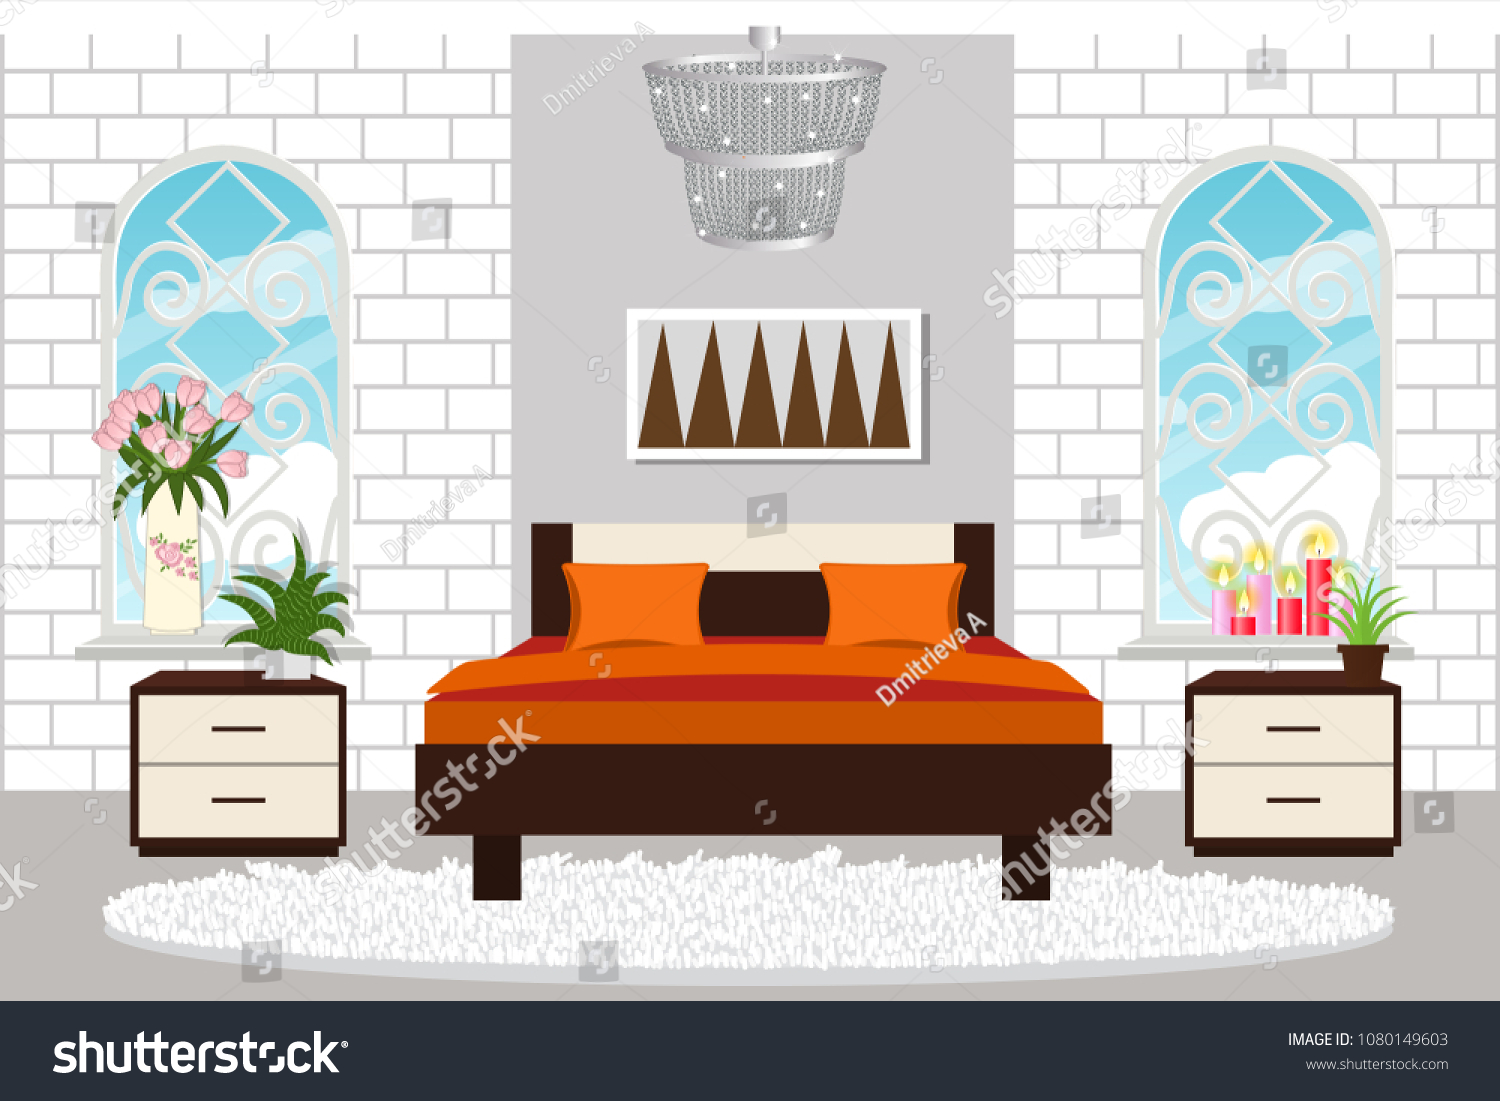 Bedroom Interior Furniture Cool Cozy Lounge Stock Vector Royalty Free 1080149603